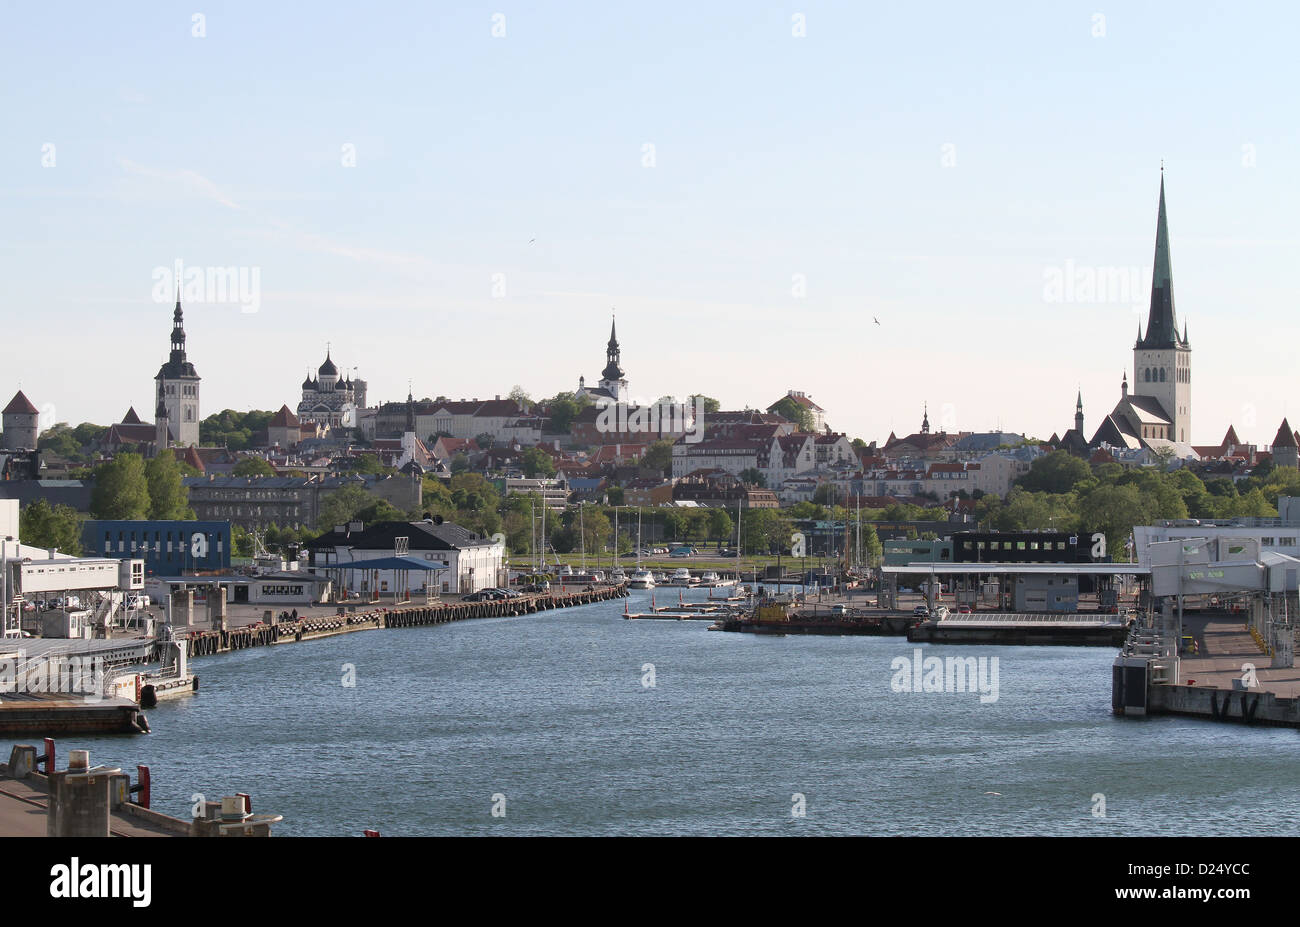 Empty ferry berths in the port of Tallinn Estonia with the buildings and spires of the city of Tallinn in the background on a spring May evening. Stock Photo